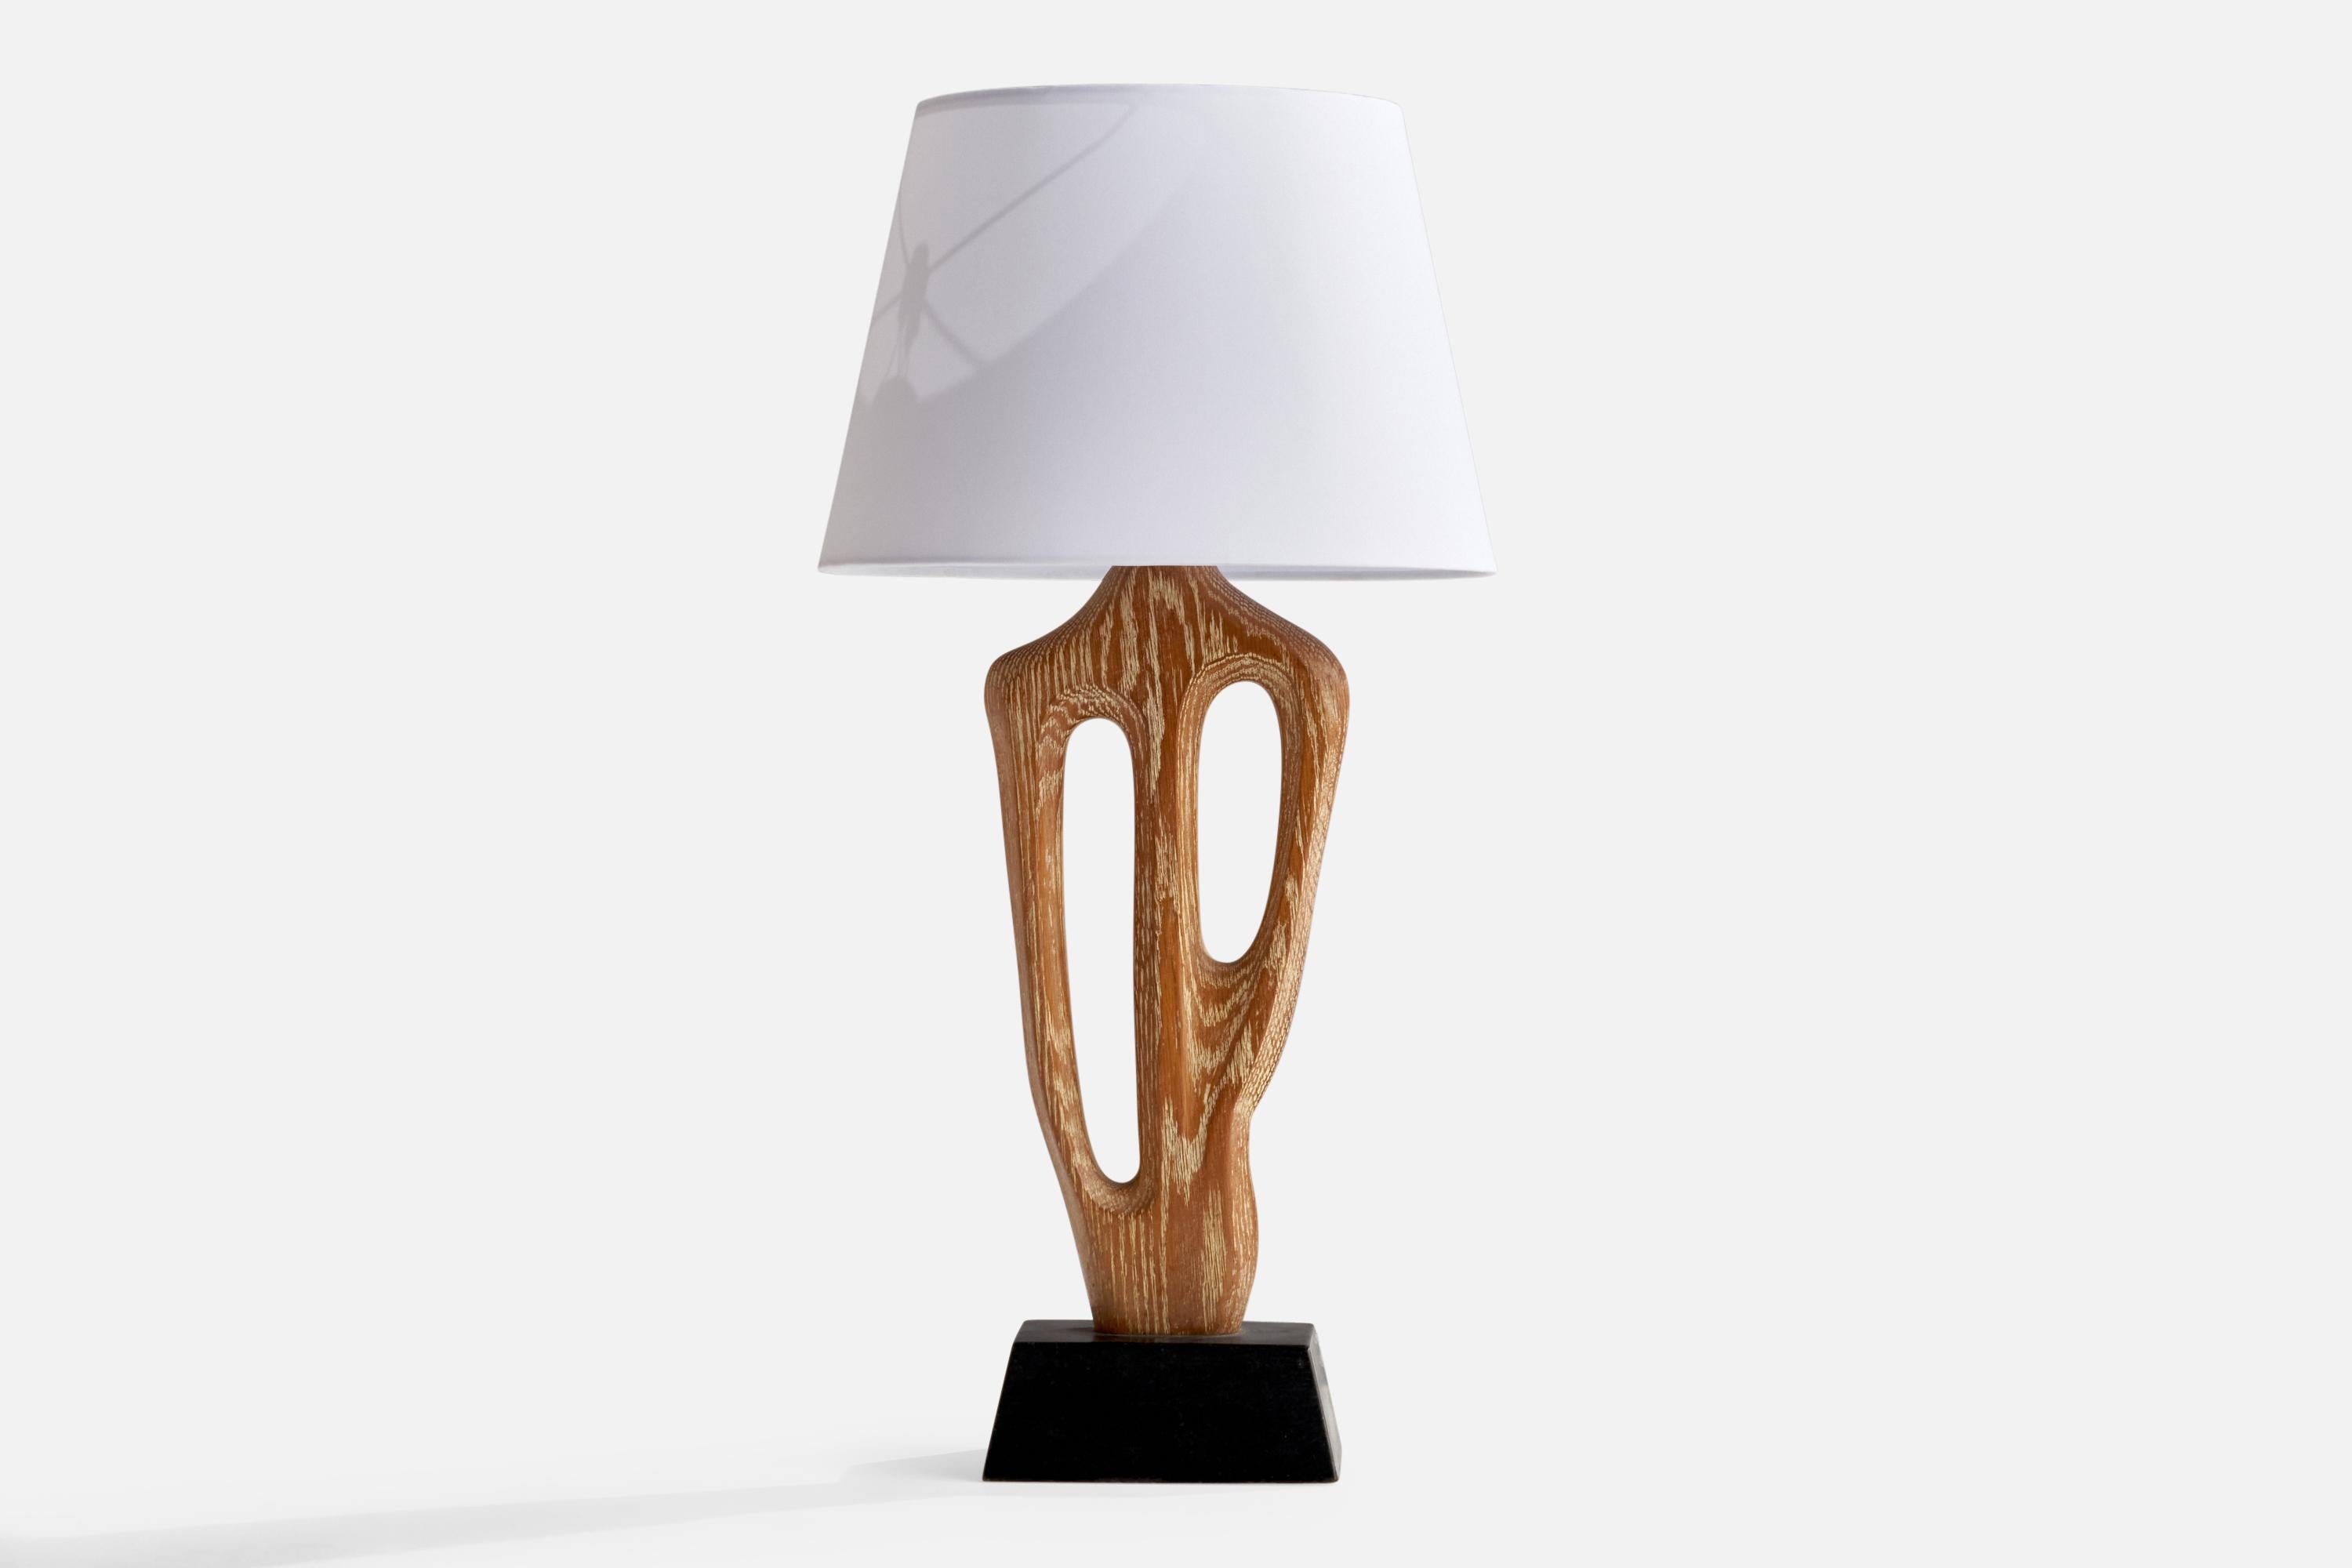 A cerused and black-painted oak table lamp designed and produced by Yasha Heifetz, USA, 1950s.

Overall Dimensions (inches): 29”  H x 14” W x 5.5” D
Stated dimensions include shade.
Bulb Specifications: E-26 Bulb
Number of Sockets: 1
All lighting